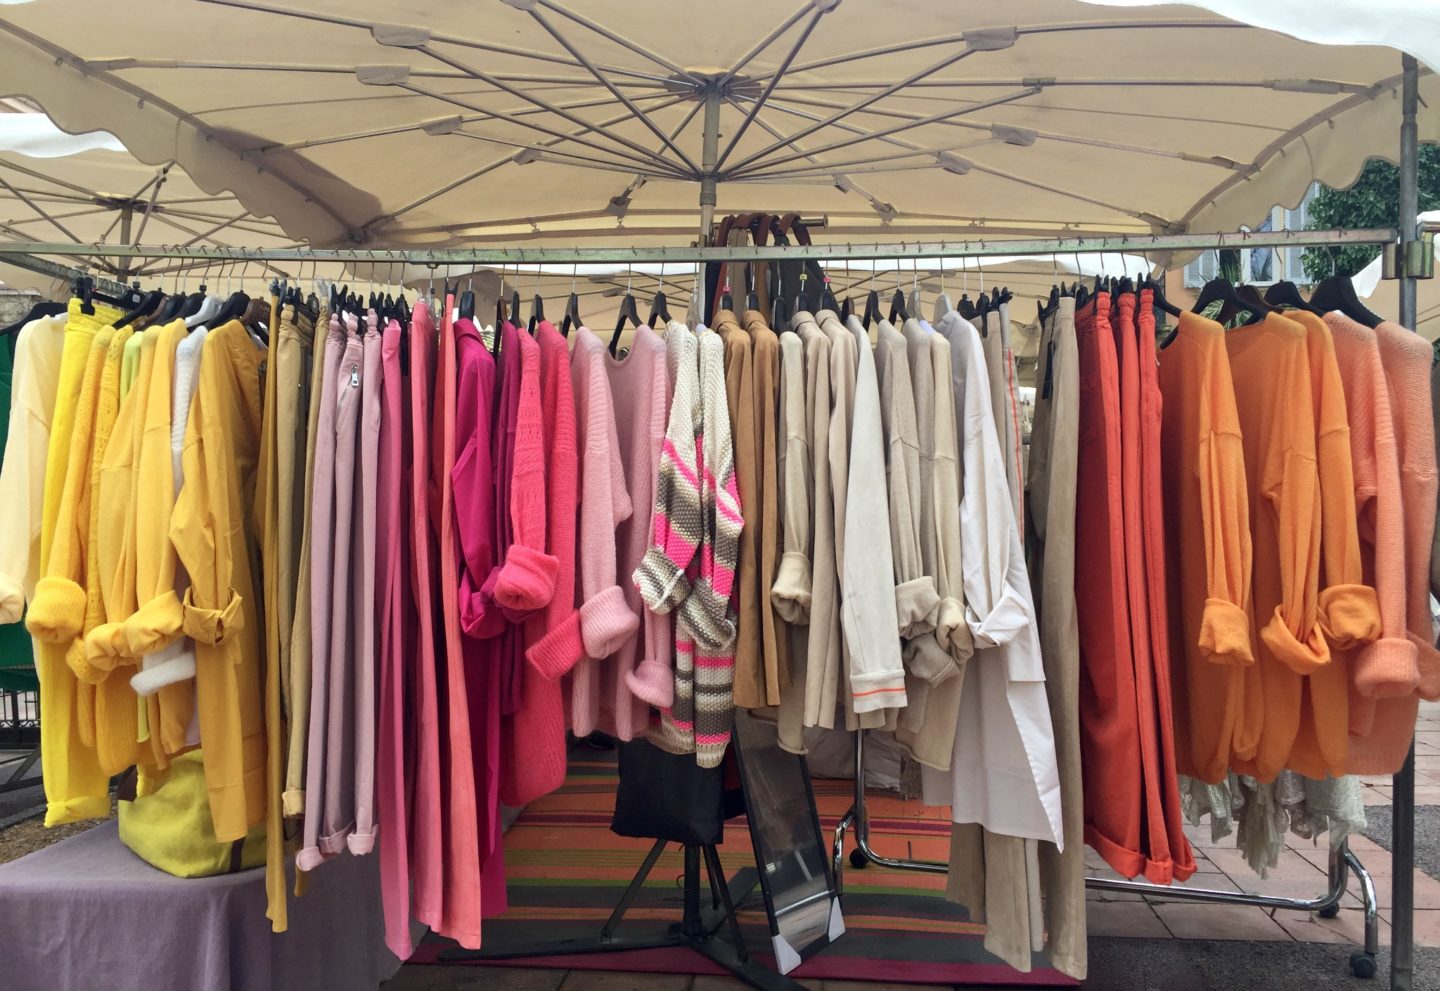 News and views from St.Tropez market